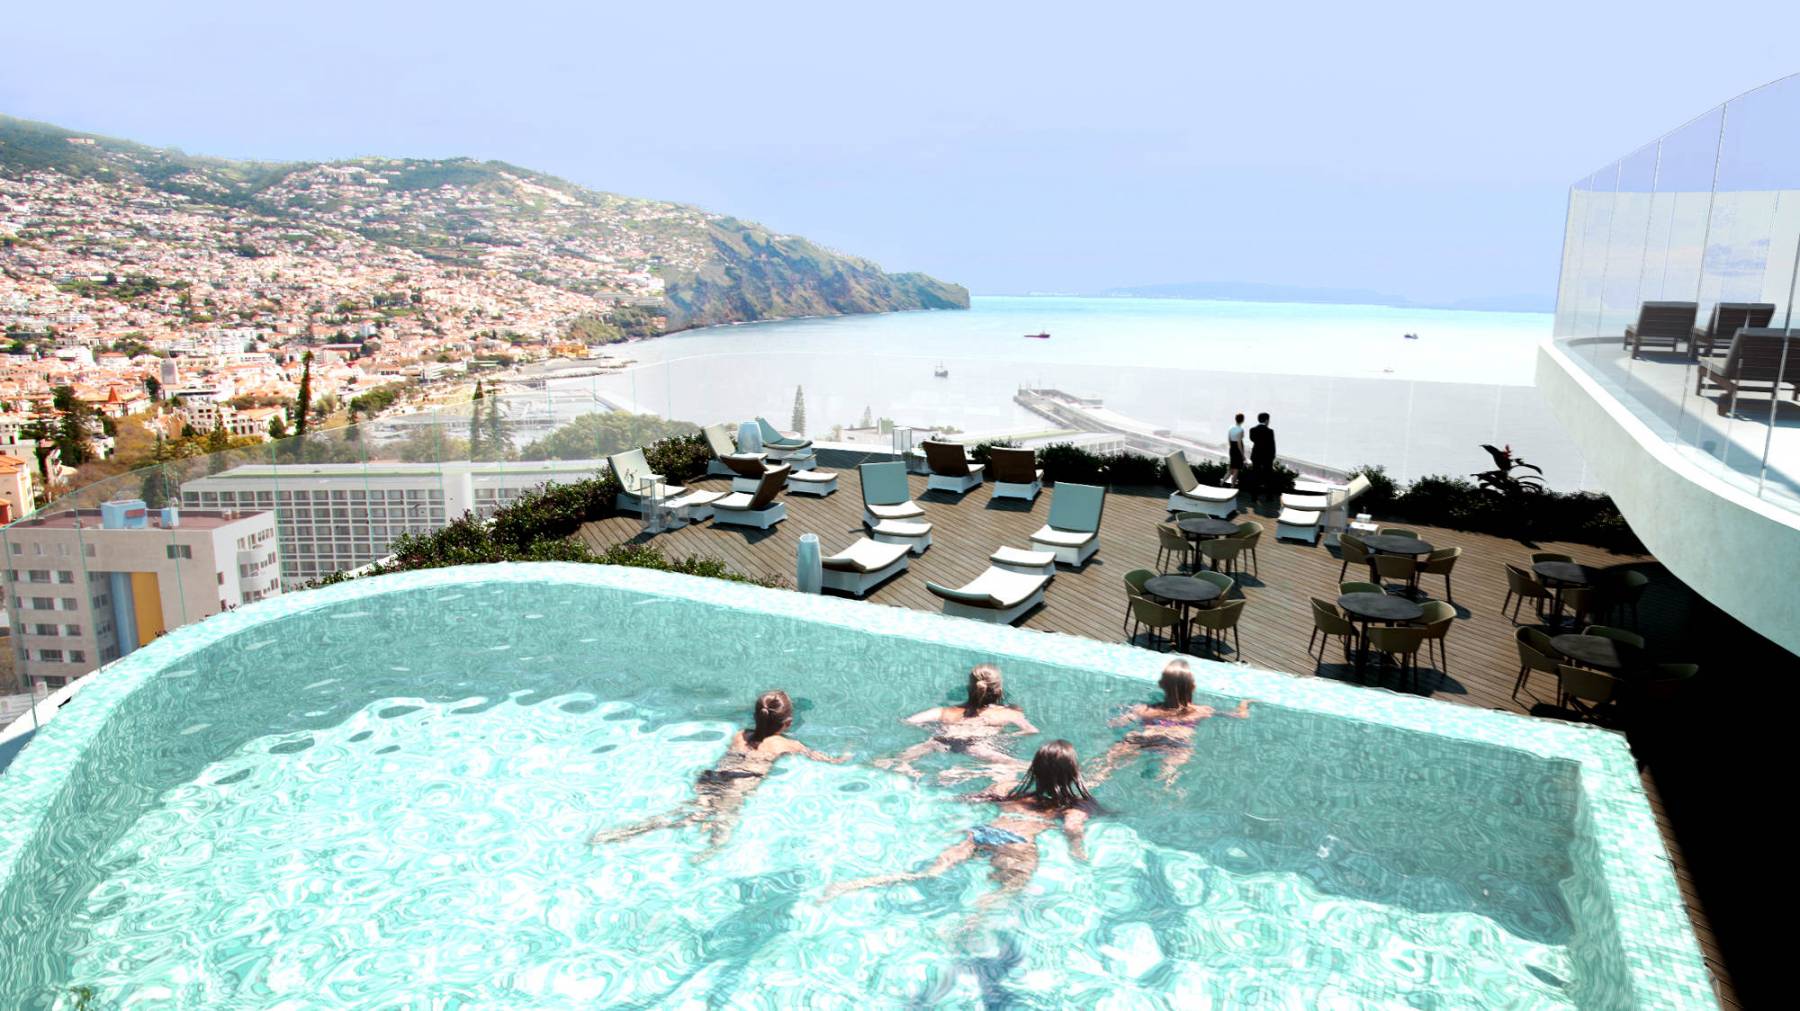 Dachpool den Savoy Palace Madeira by Savoy Hotels via LMG Management